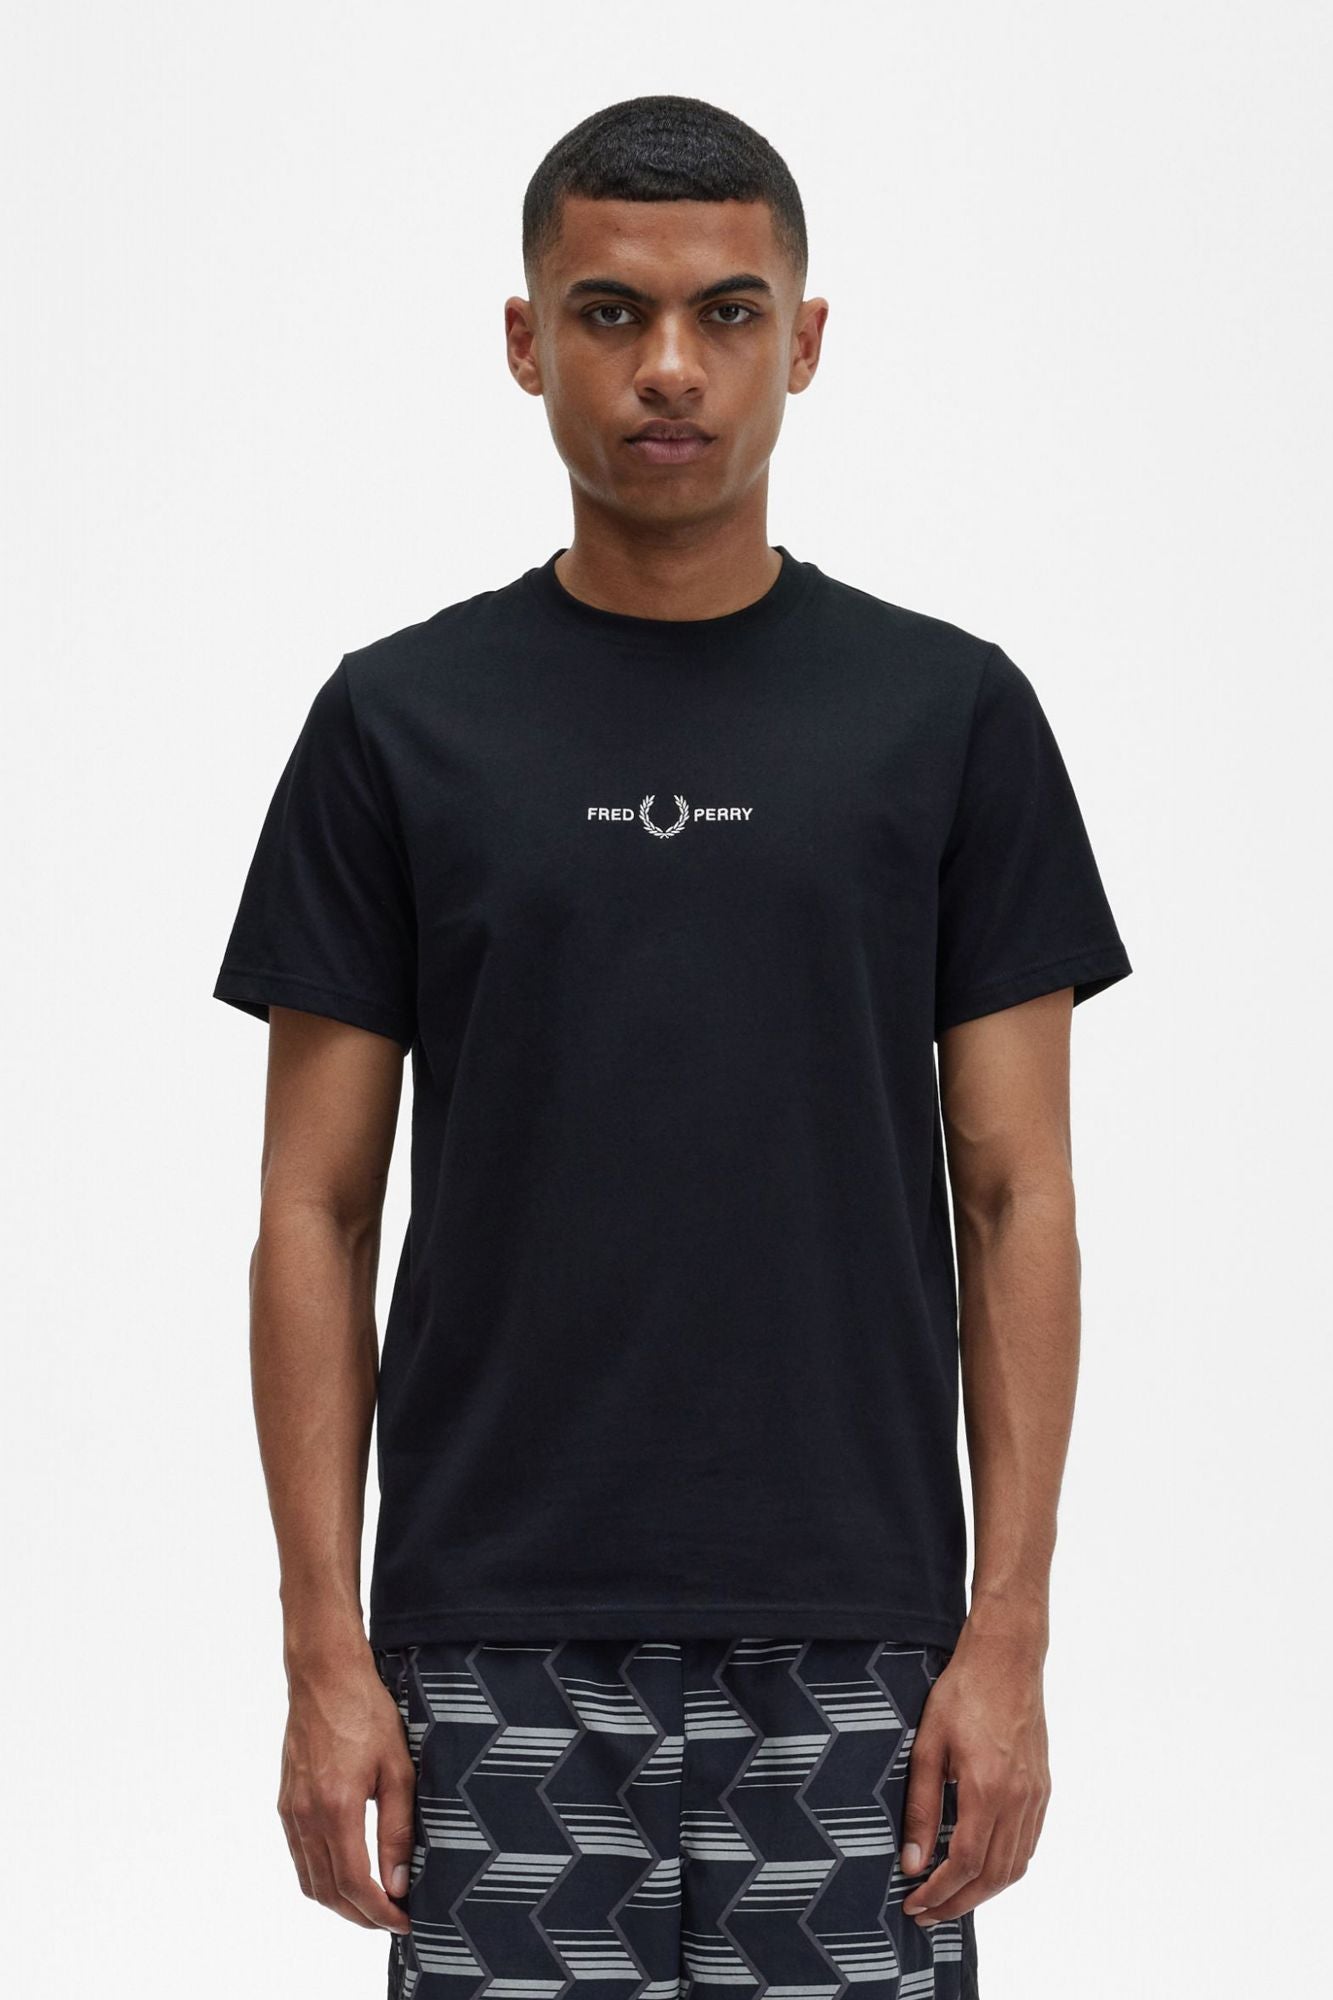 FRED PERRY M4580FP en color NEGRO (1)